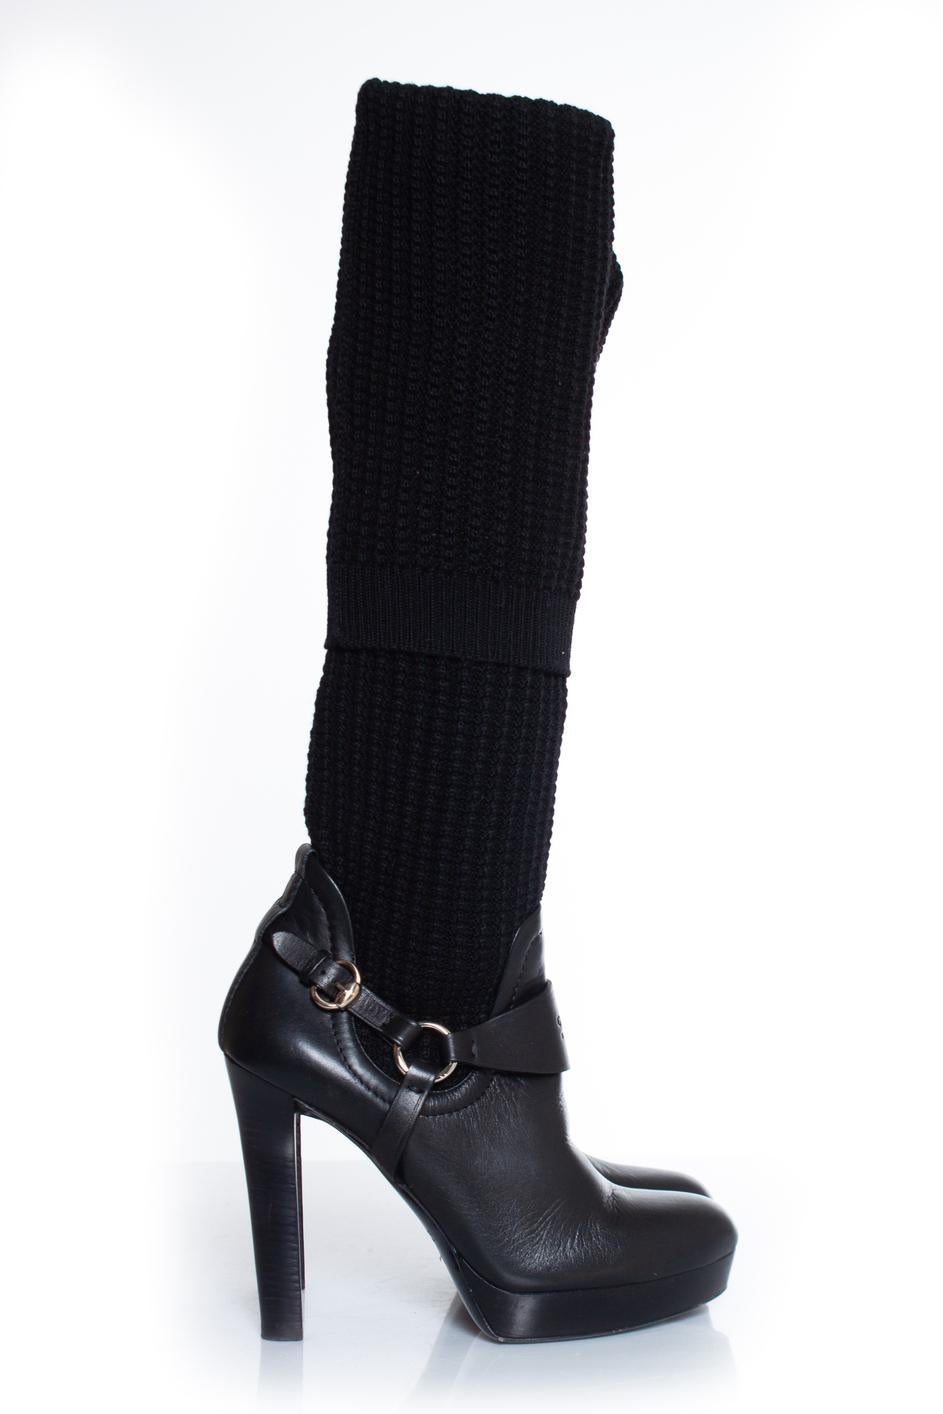 Gucci, Black over knee sock boots For Sale 1